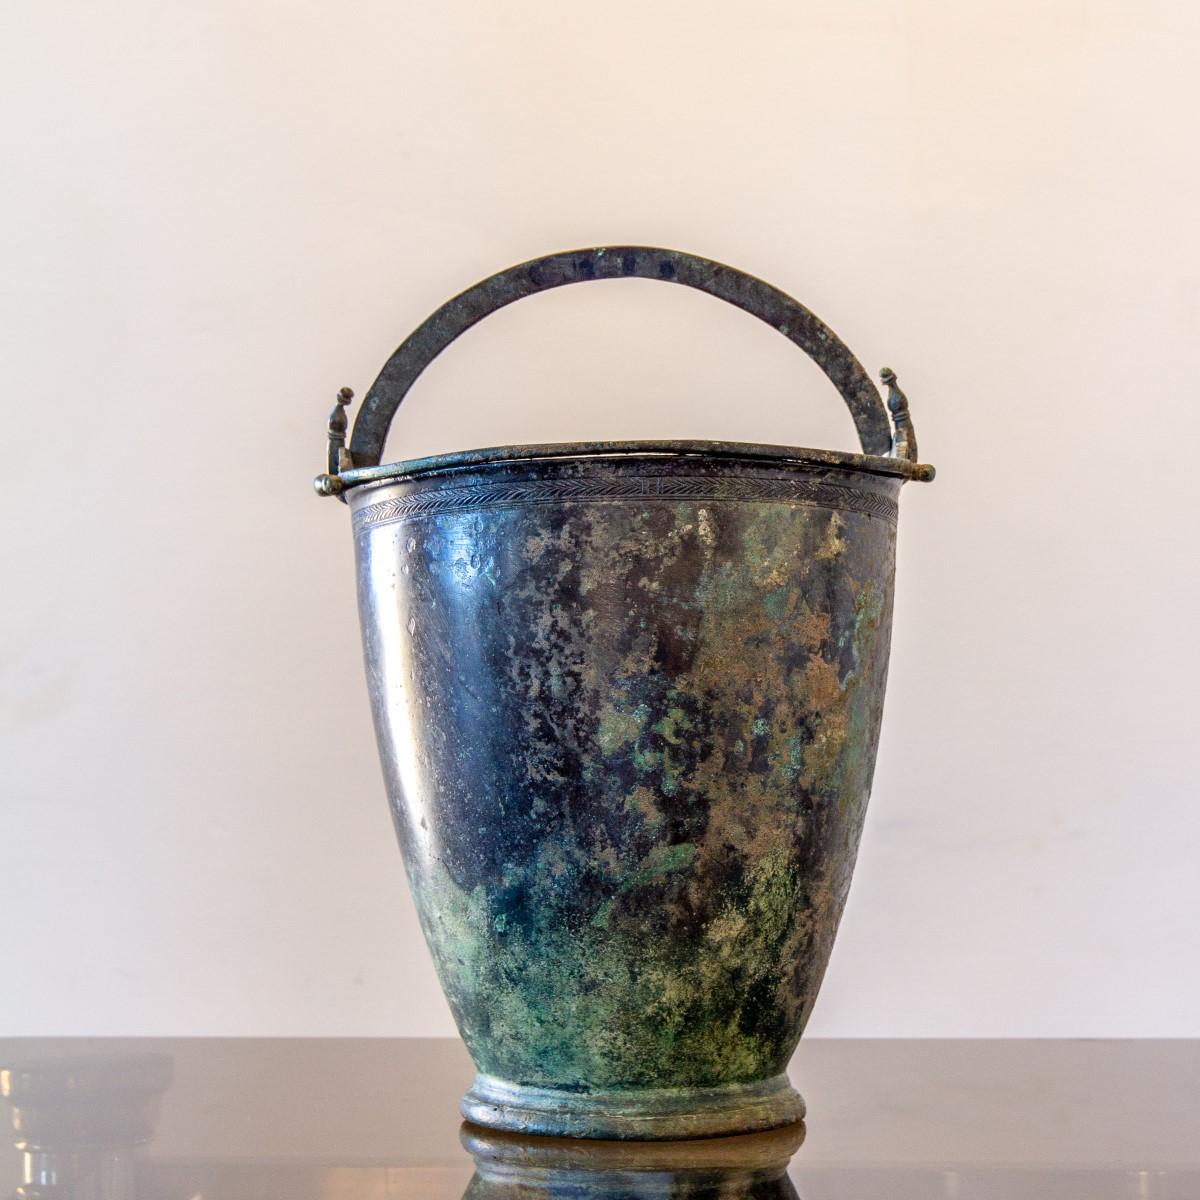 A 4th century BC Grecian bronze bucket with a circular foot and tapering cylindrical body. The feathered frieze around the top rim sits below two double rings with central carved palmettes and the two handles are omega shaped and hooked into loops,